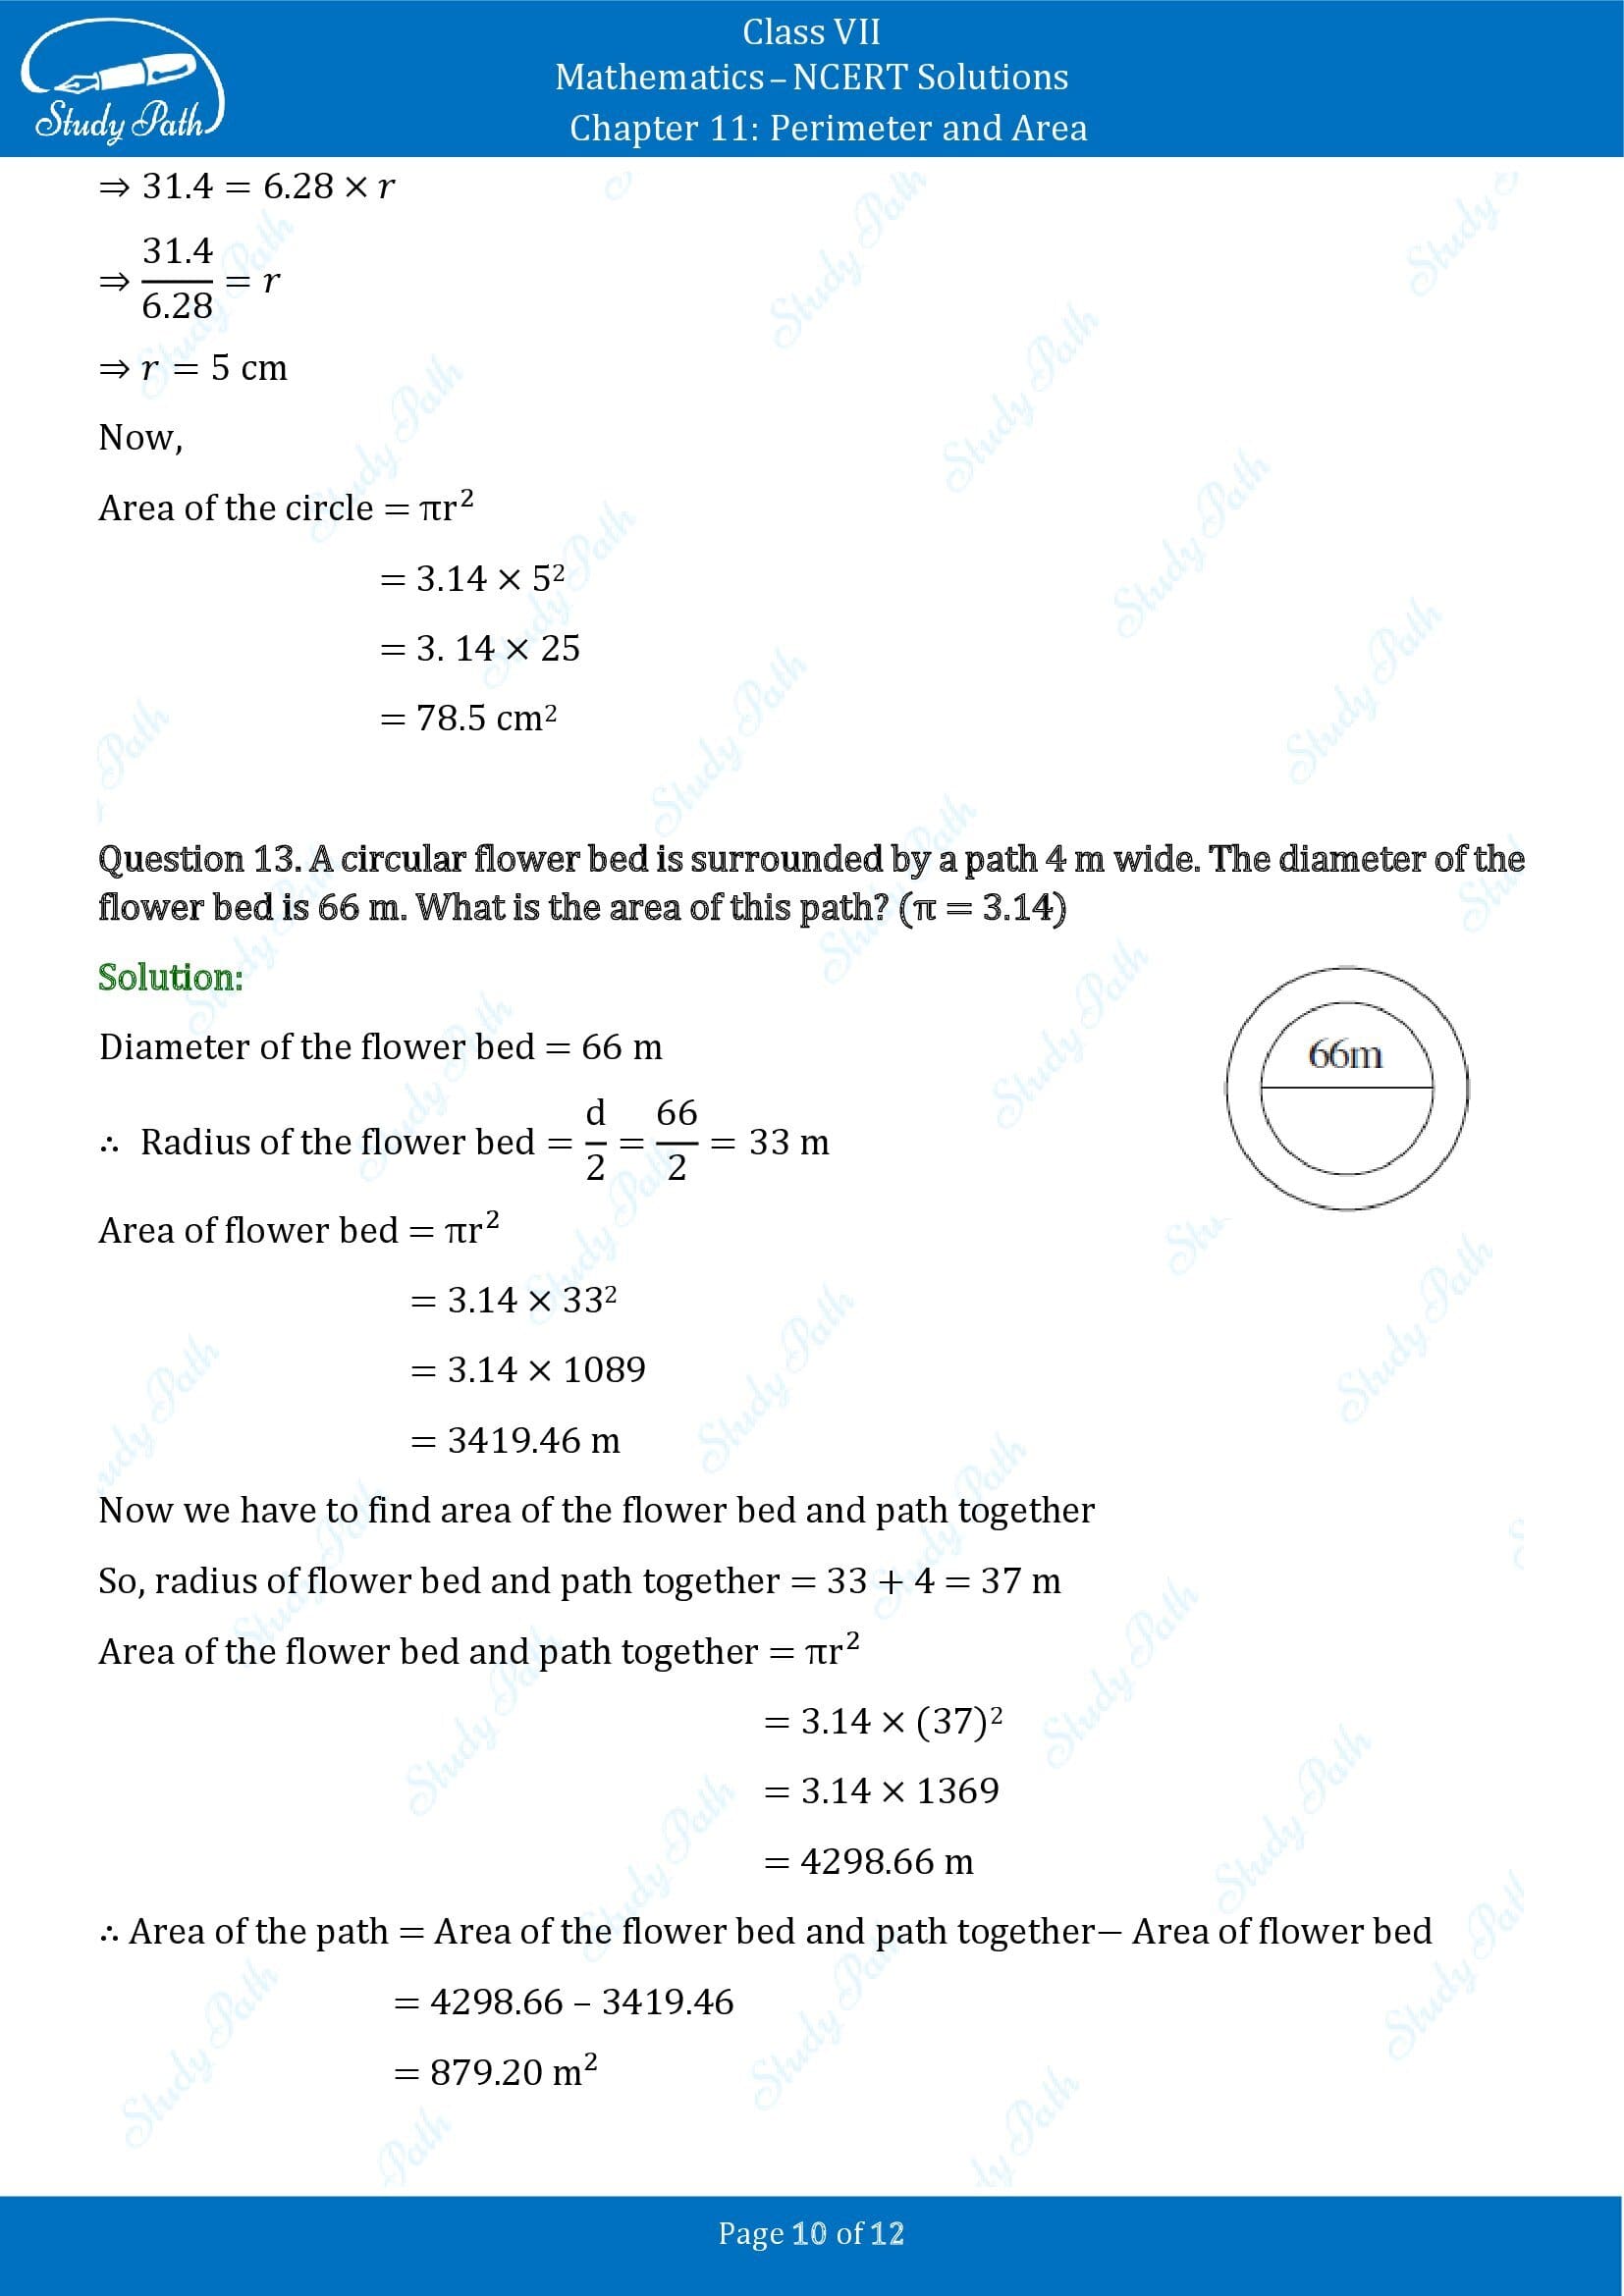 NCERT Solutions for Class 7 Maths Chapter 11 Perimeter and Area Exercise 11.3 00010